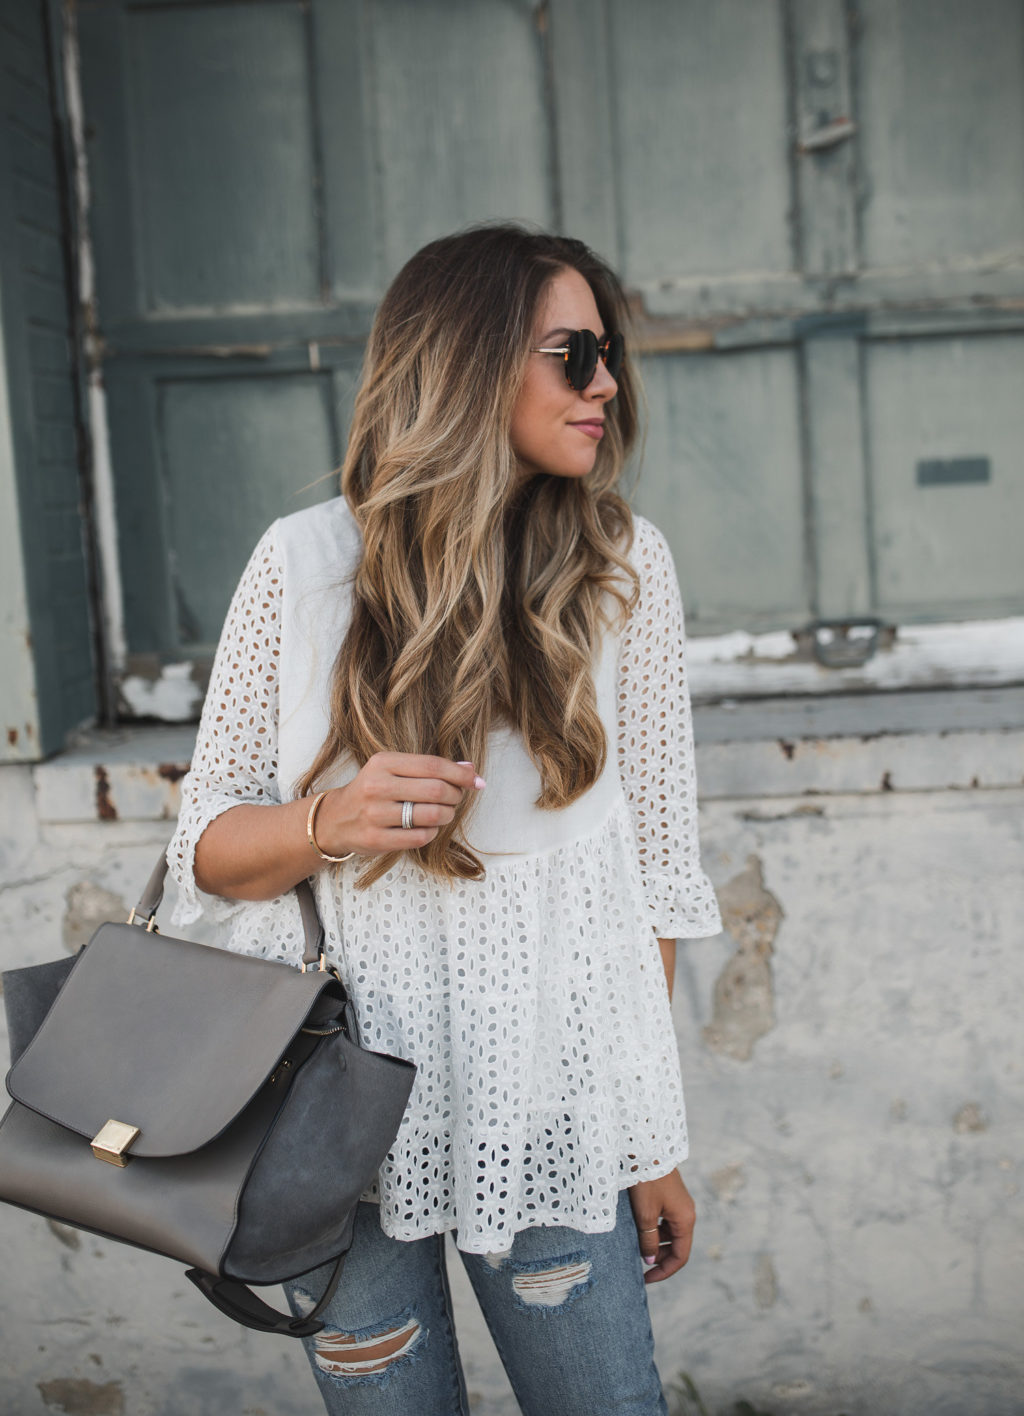 Eyelet blouse and ripped jeans